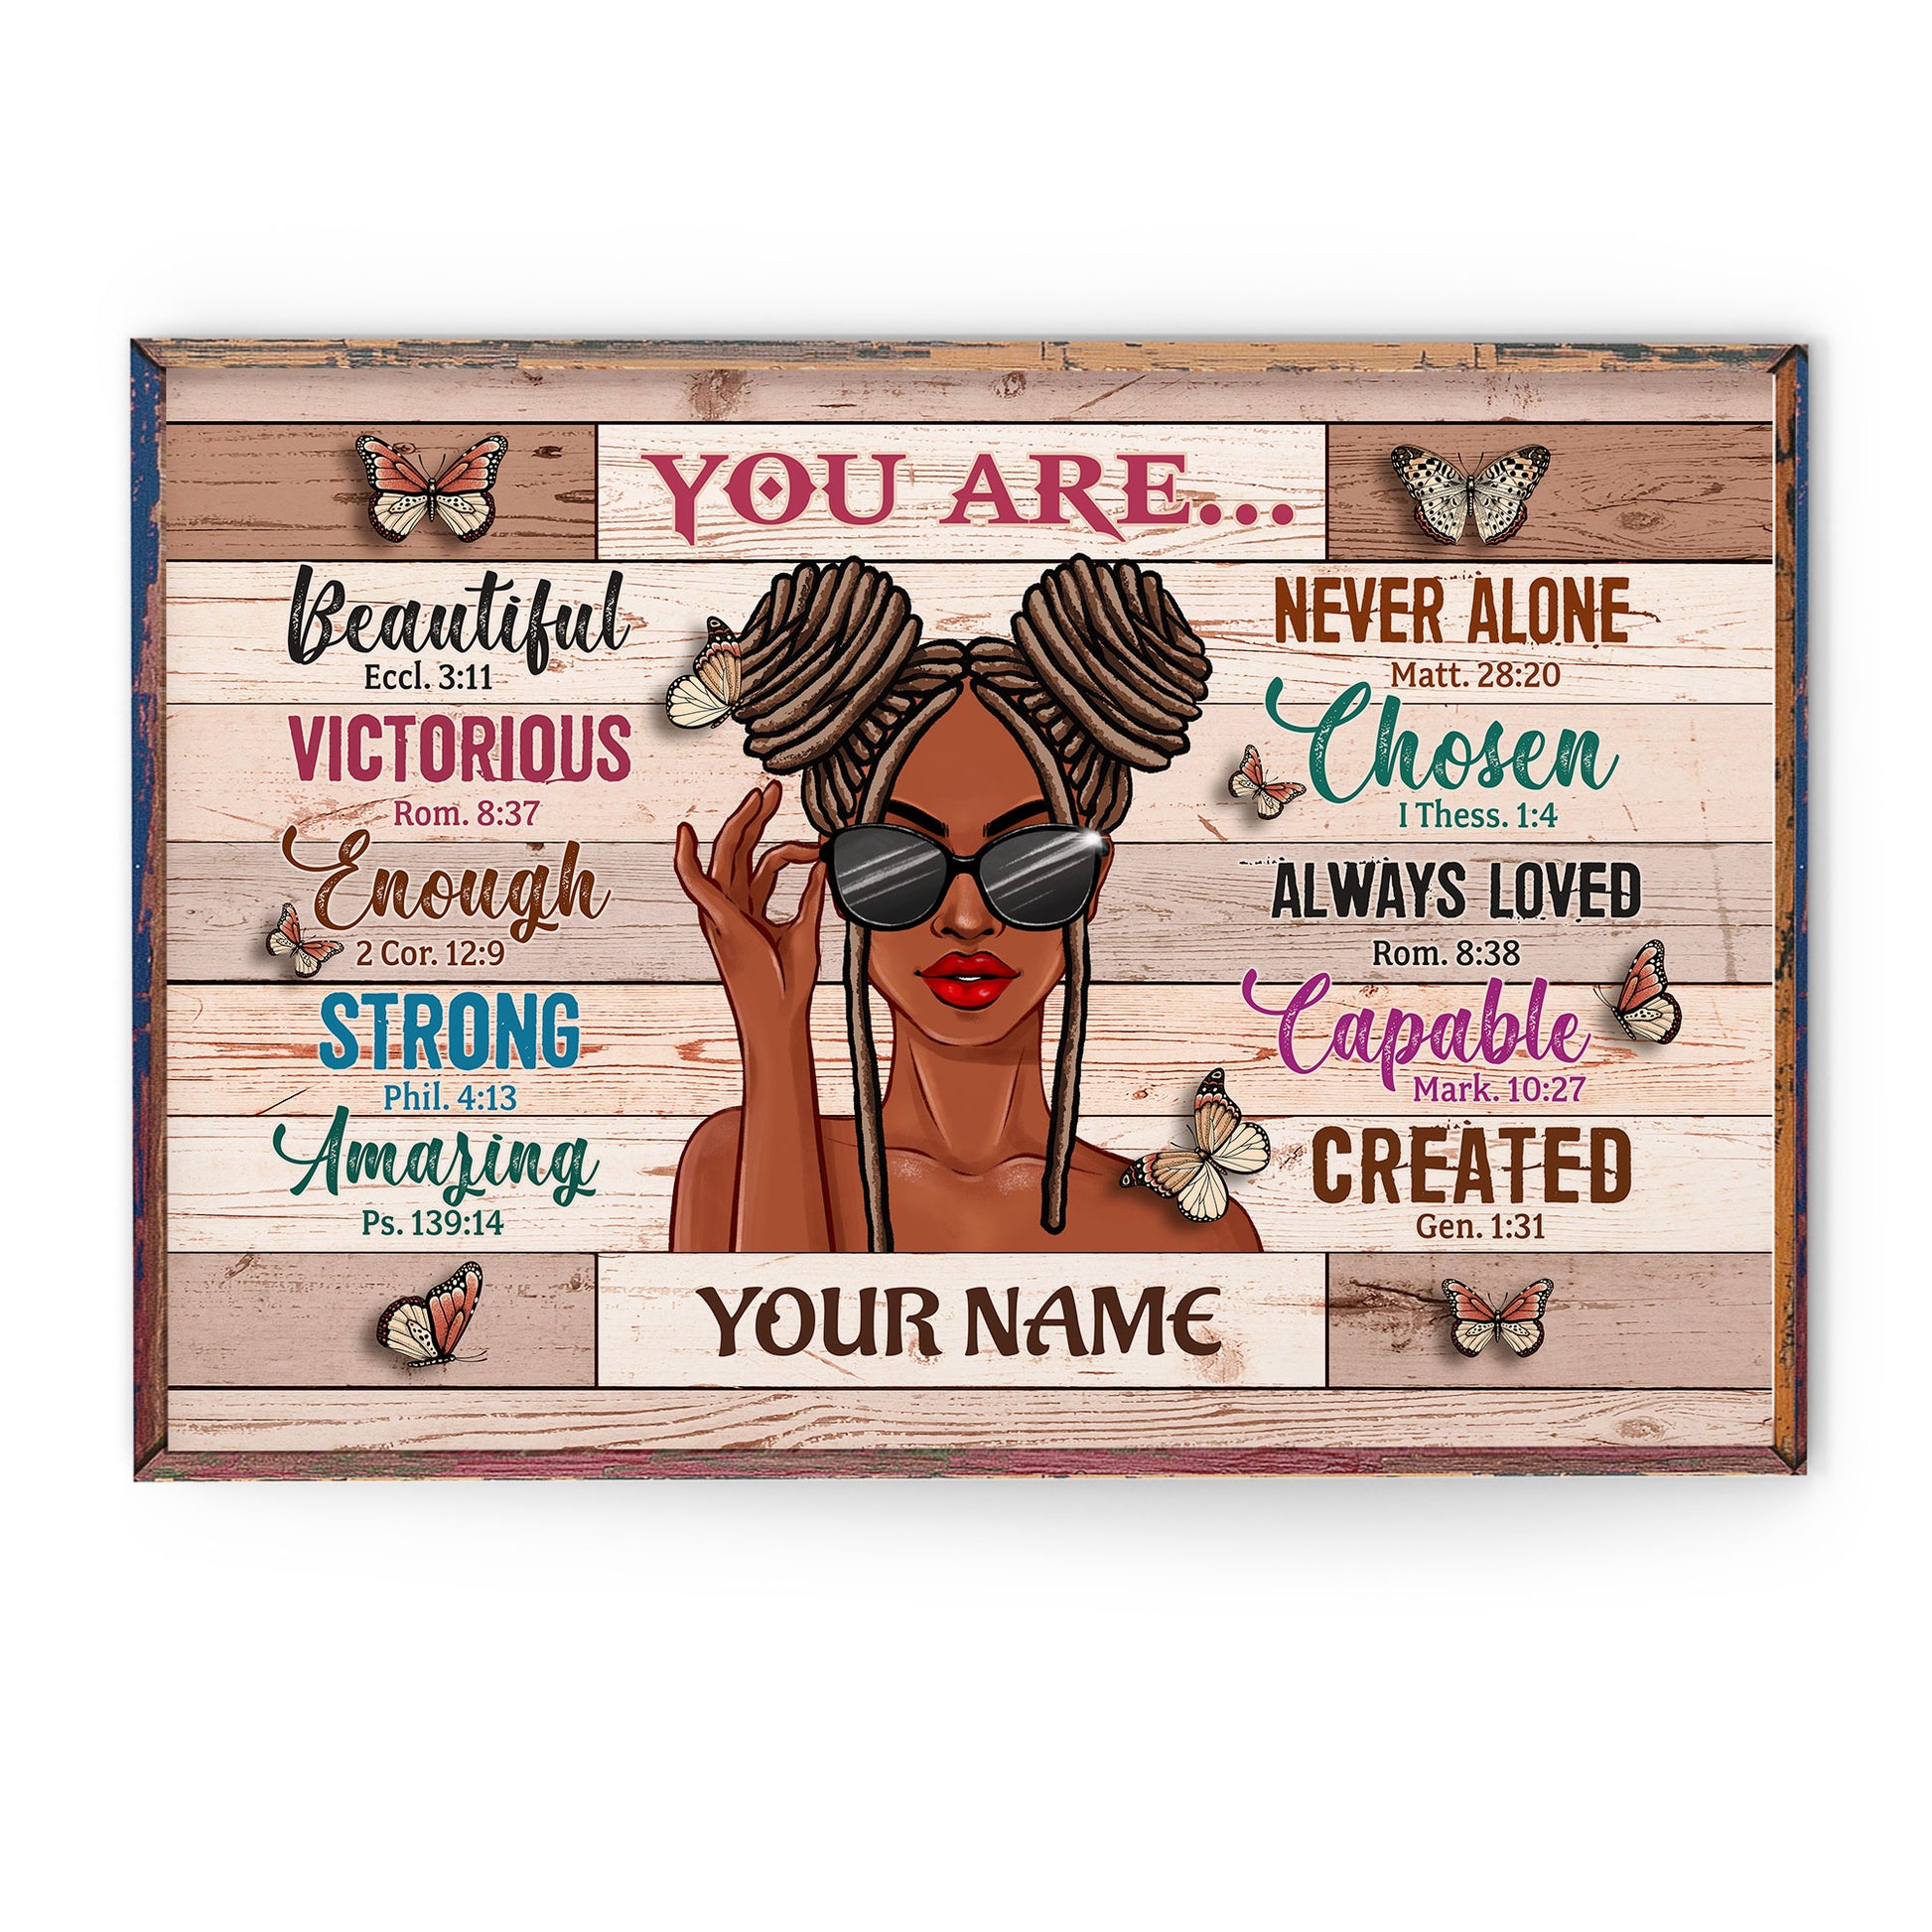 You Are Beautiful Victorious - Personalized Poster/Canvas - Birthday Gift For Black Girl - Black Girl